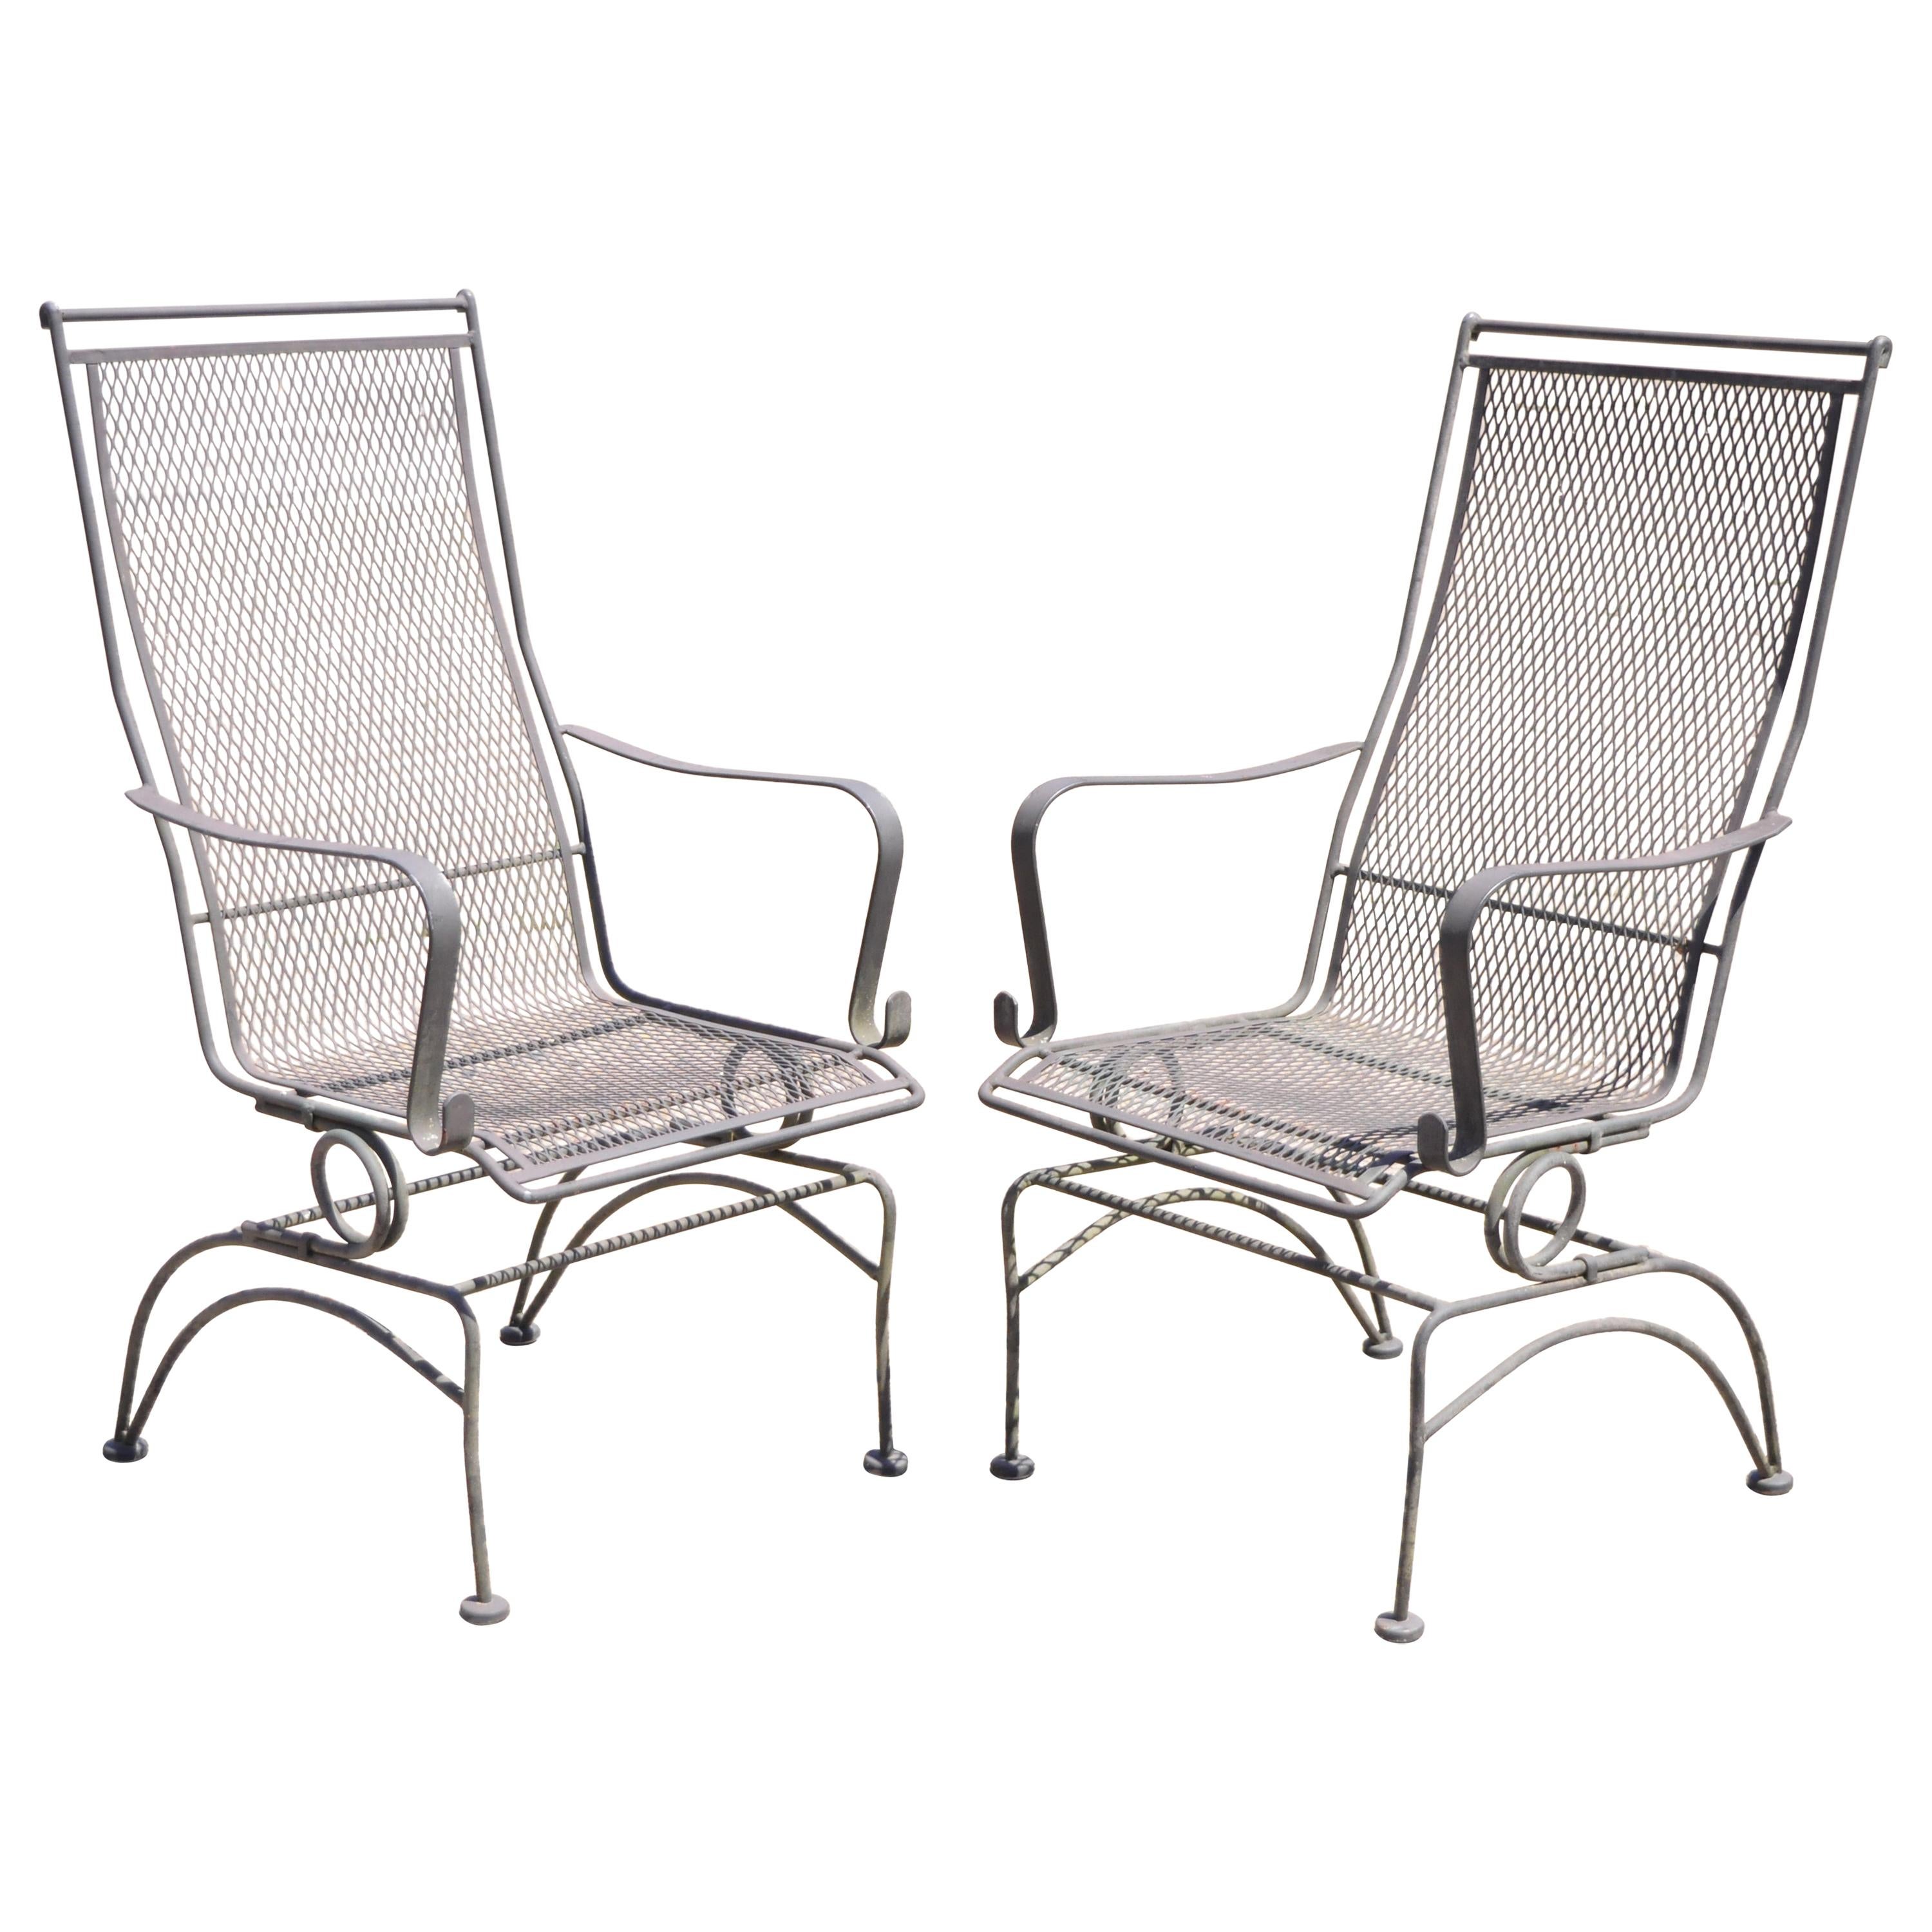 Woodard Bradford Collection Spring High Back Wrought Iron Patio Chairs, a Pair For Sale